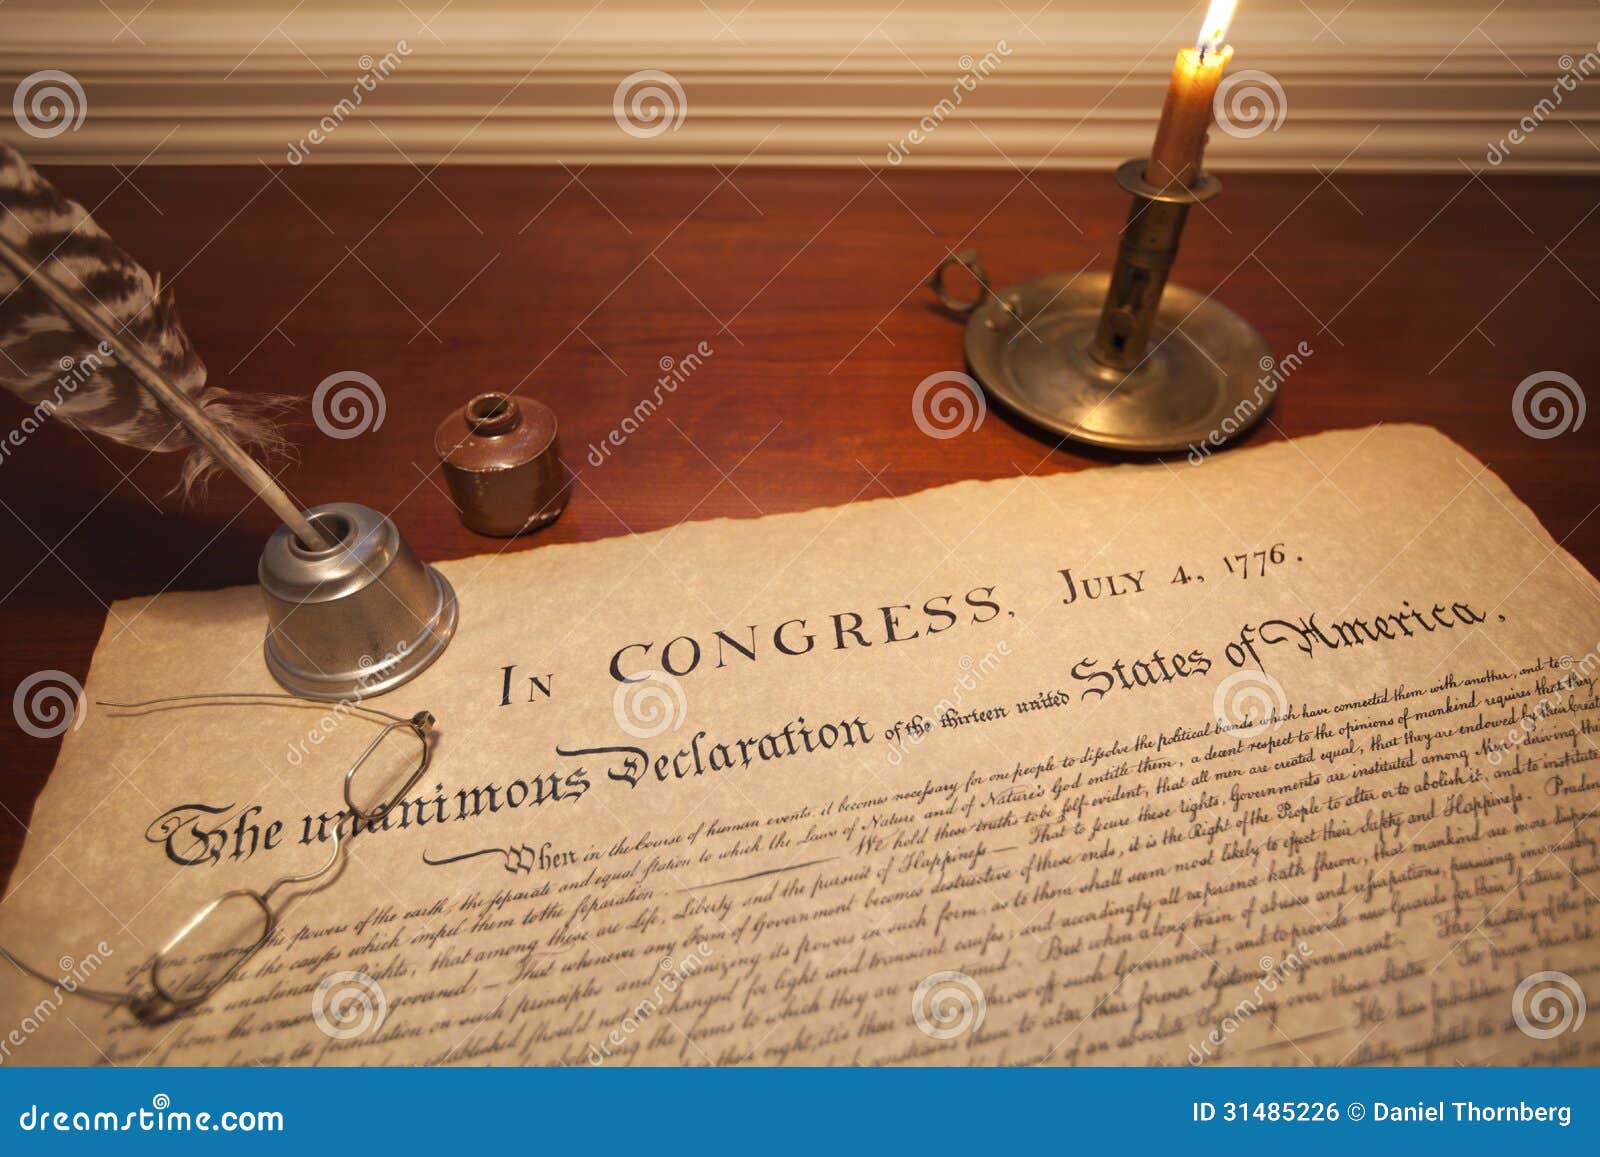 declaration of independence with glasses, quill pen and candle